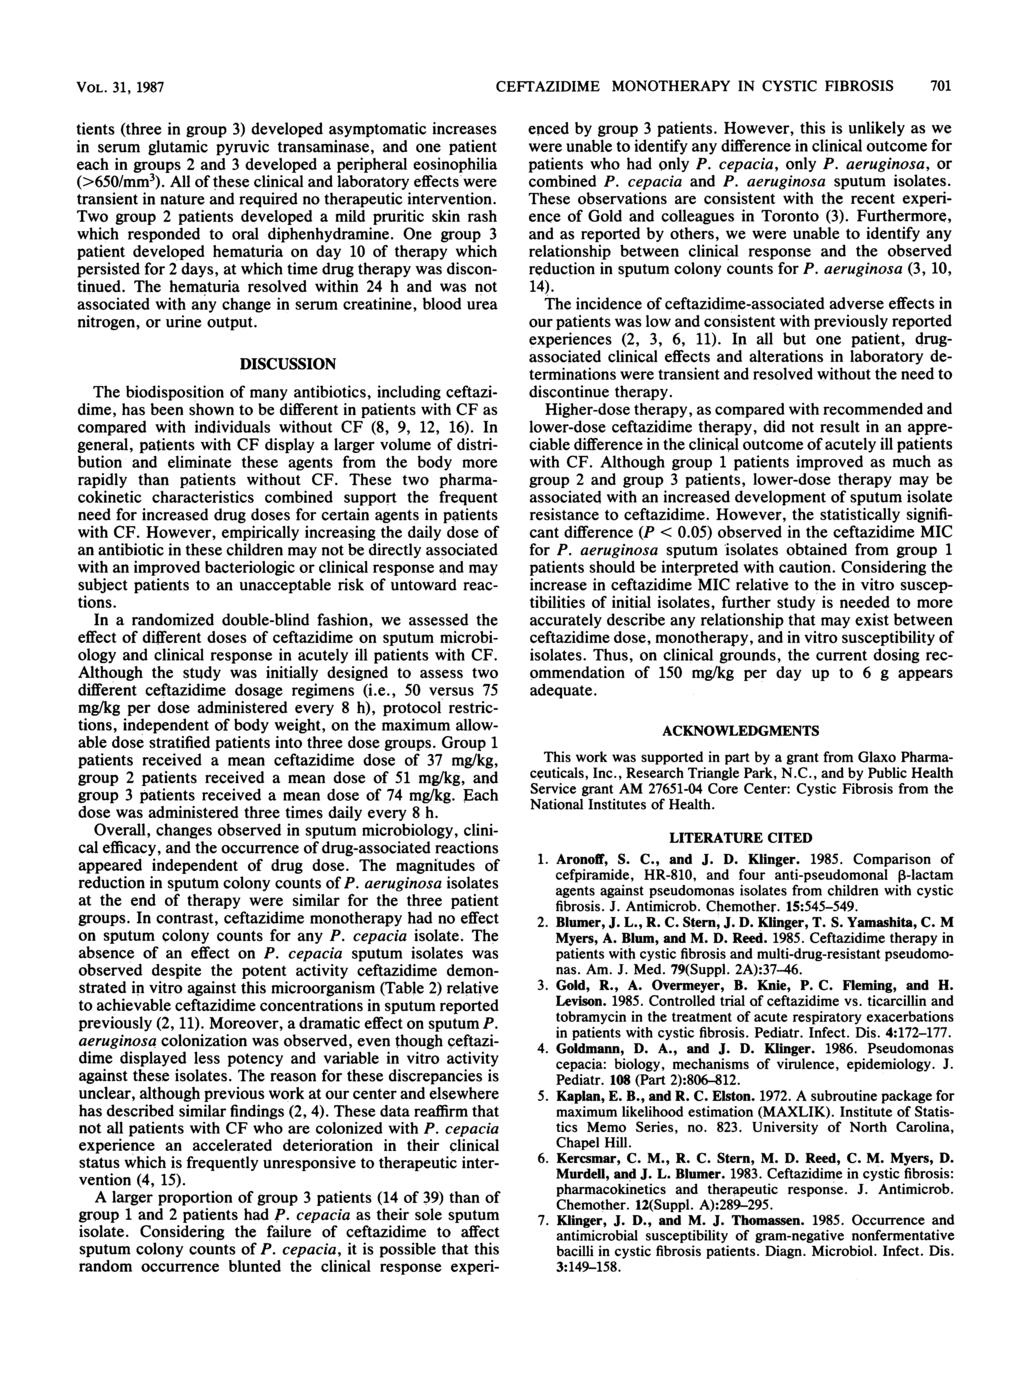 VOL. 31, 1987 CEFTAZIDIME MONOTHERAPY IN CYSTIC FIBROSIS 701 tients (three in group 3) developed asymptomatic increases in serum glutamic pyruvic transaminase, and one patient each in groups 2 and 3